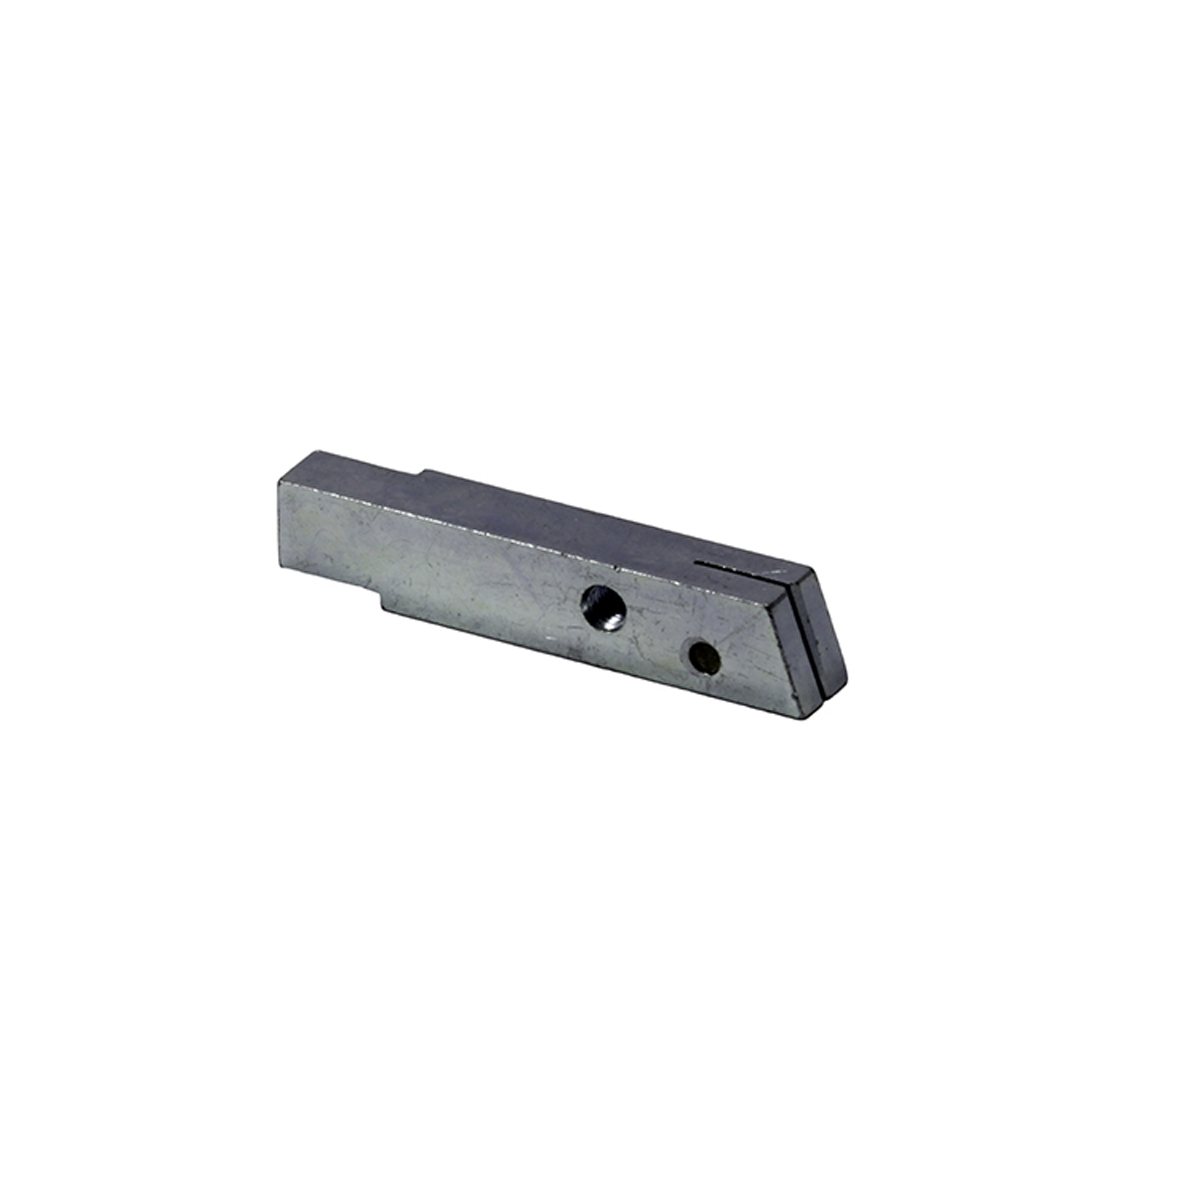 Hobart 291650-1 Equivalent Lower Guide & Plug for Band Saw 5700